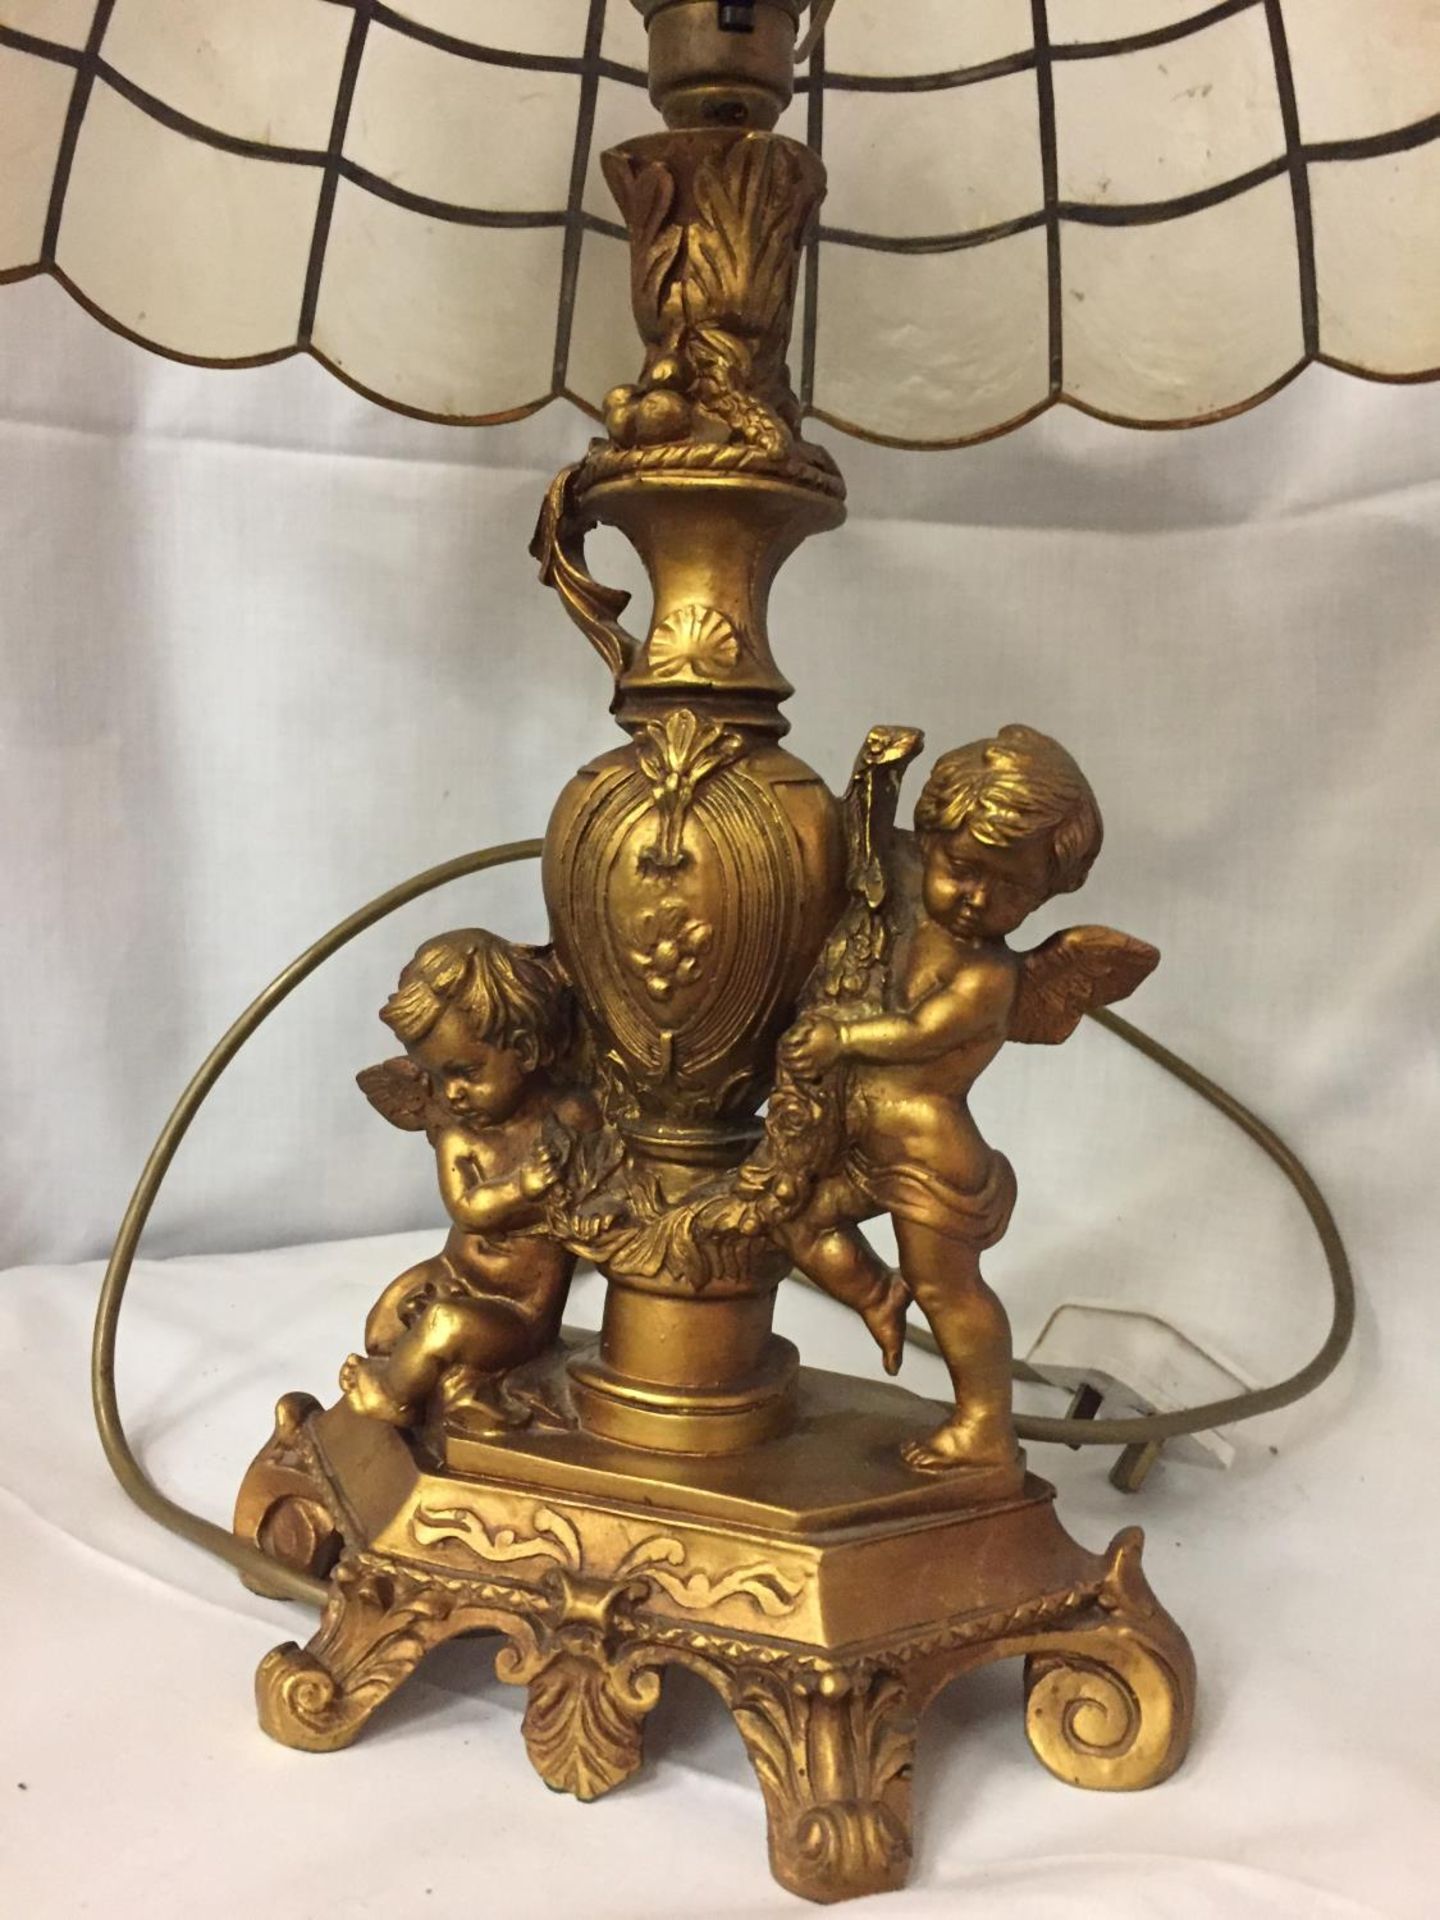 AN ORNATE GILDED LAMP BASE DEPICTING CHERUBS WITH A CAPIZ SHELL SHADE - Image 2 of 3